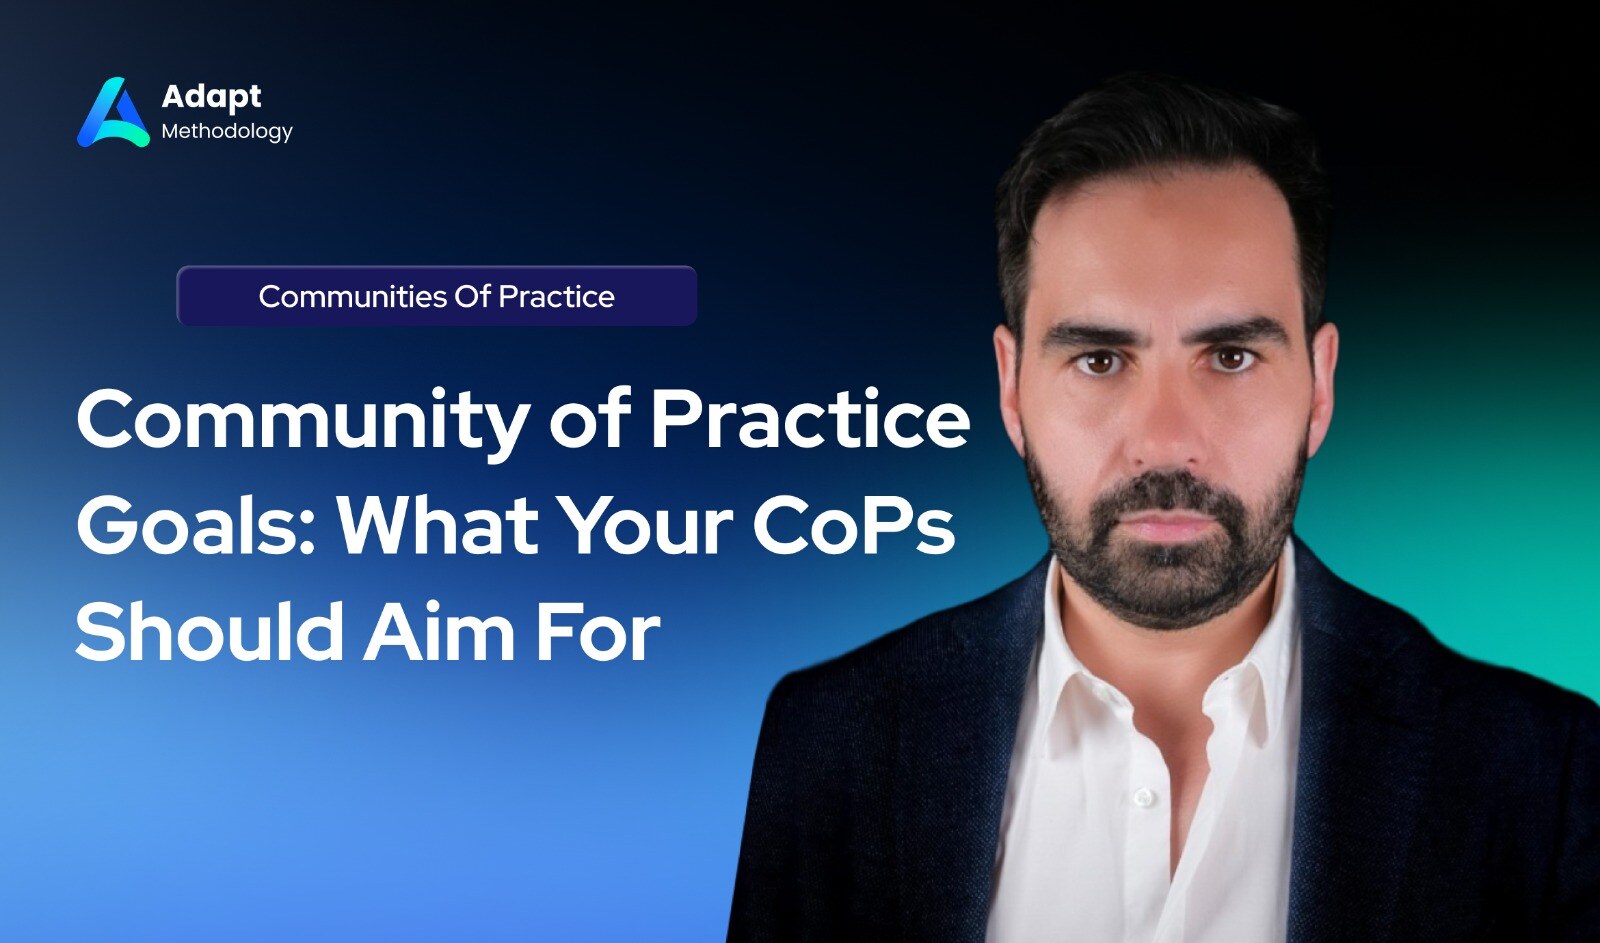 Community of Practice Goals - What Your CoPs Should Aim For